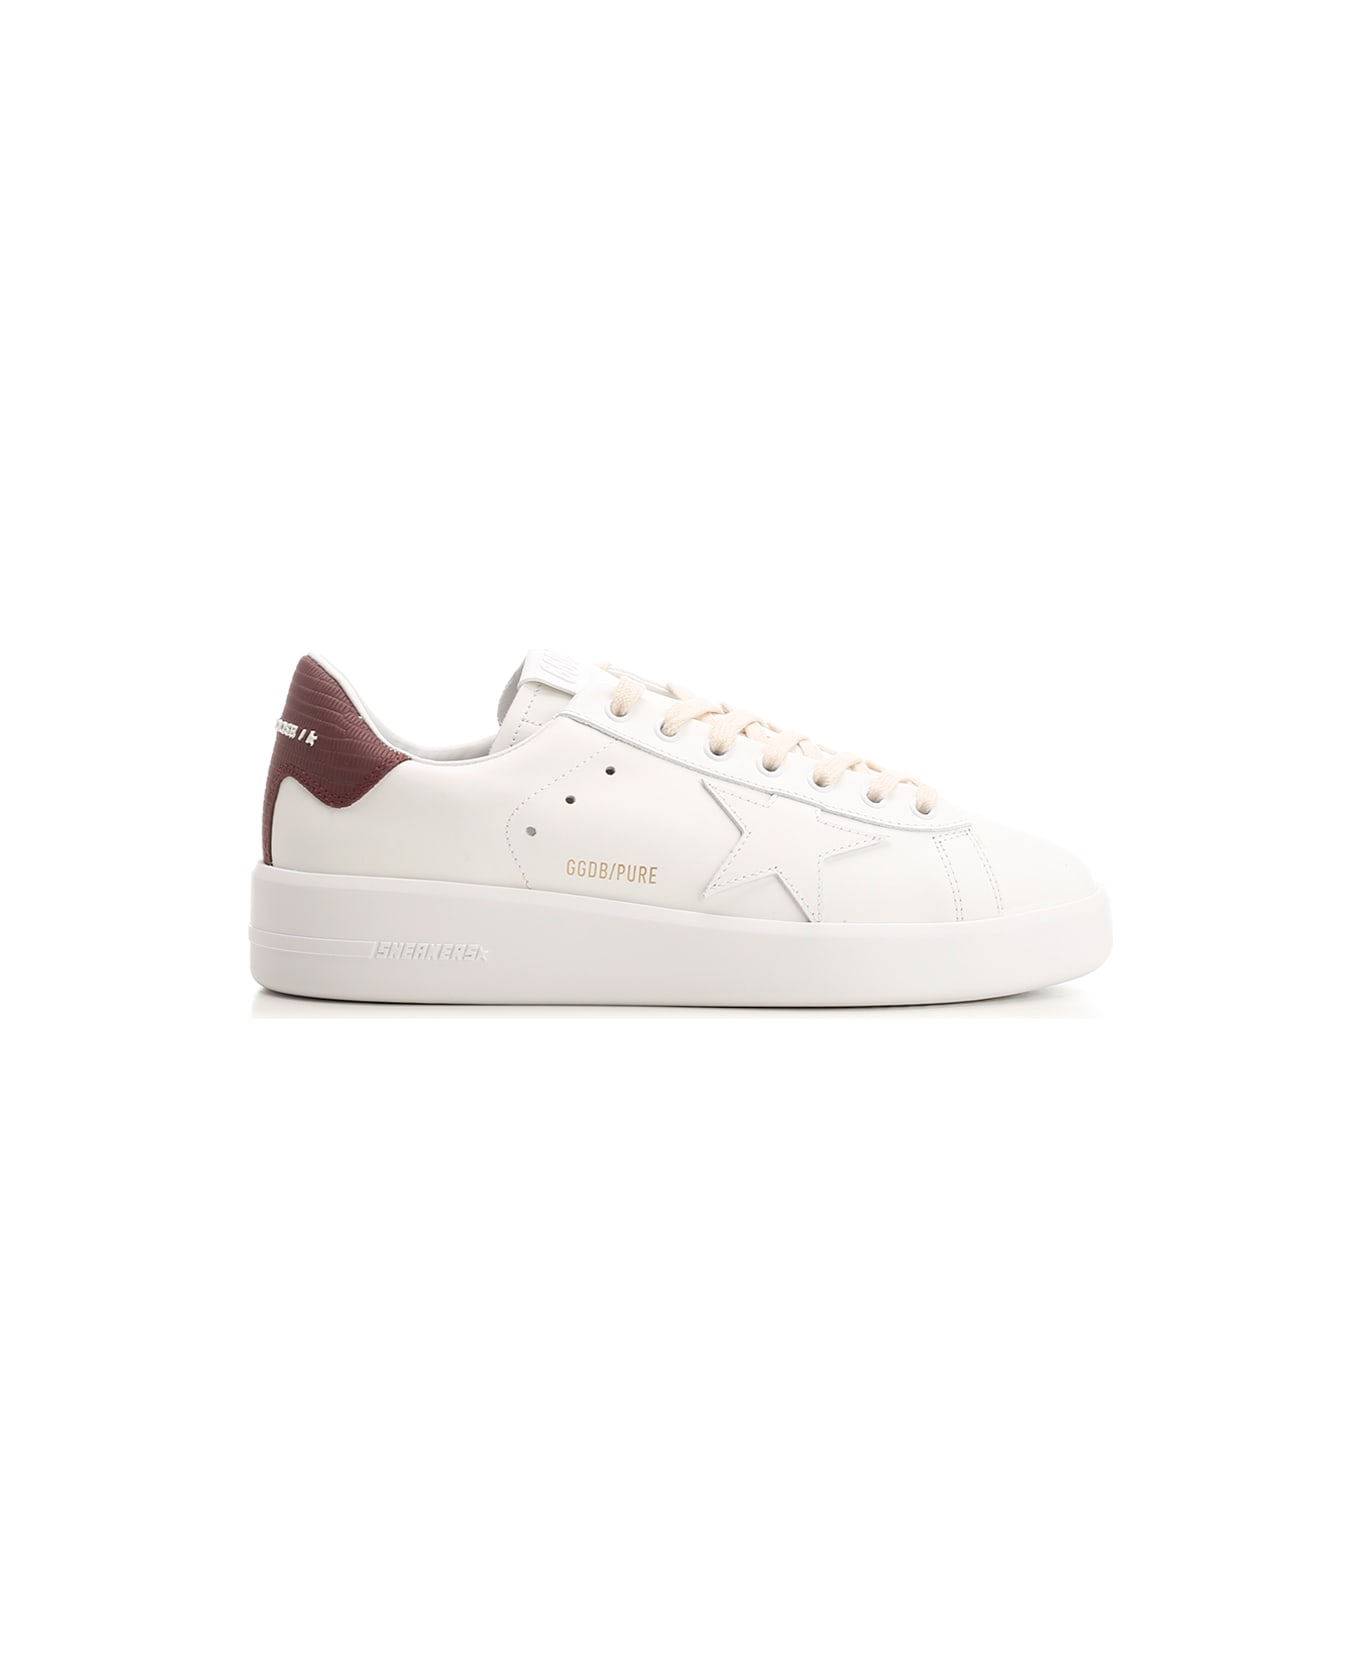 Golden Goose Pure New Leather Sneakers - White/Bordeaux